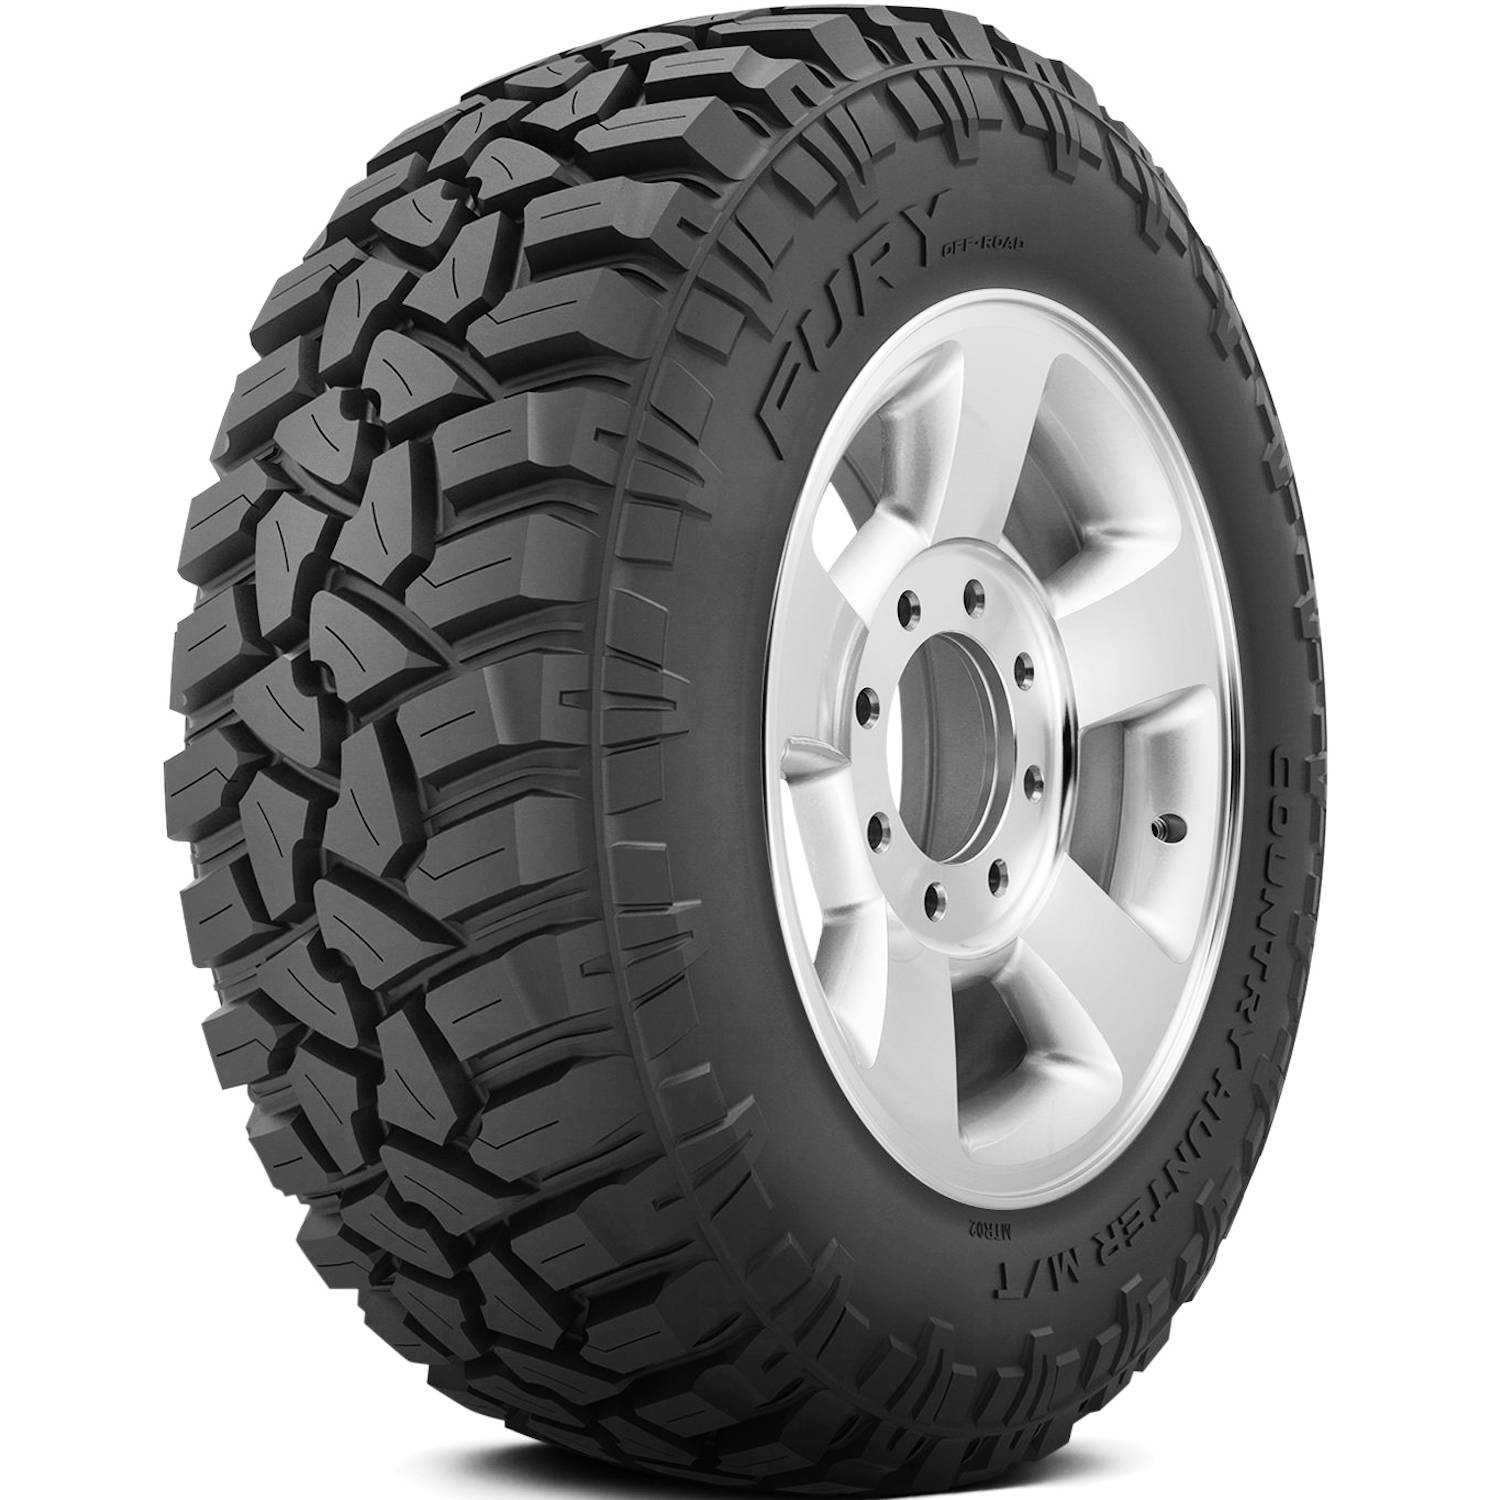 FURY OFFROAD COUNTRY HUNTER MTII 35X12.50R17LT Tires